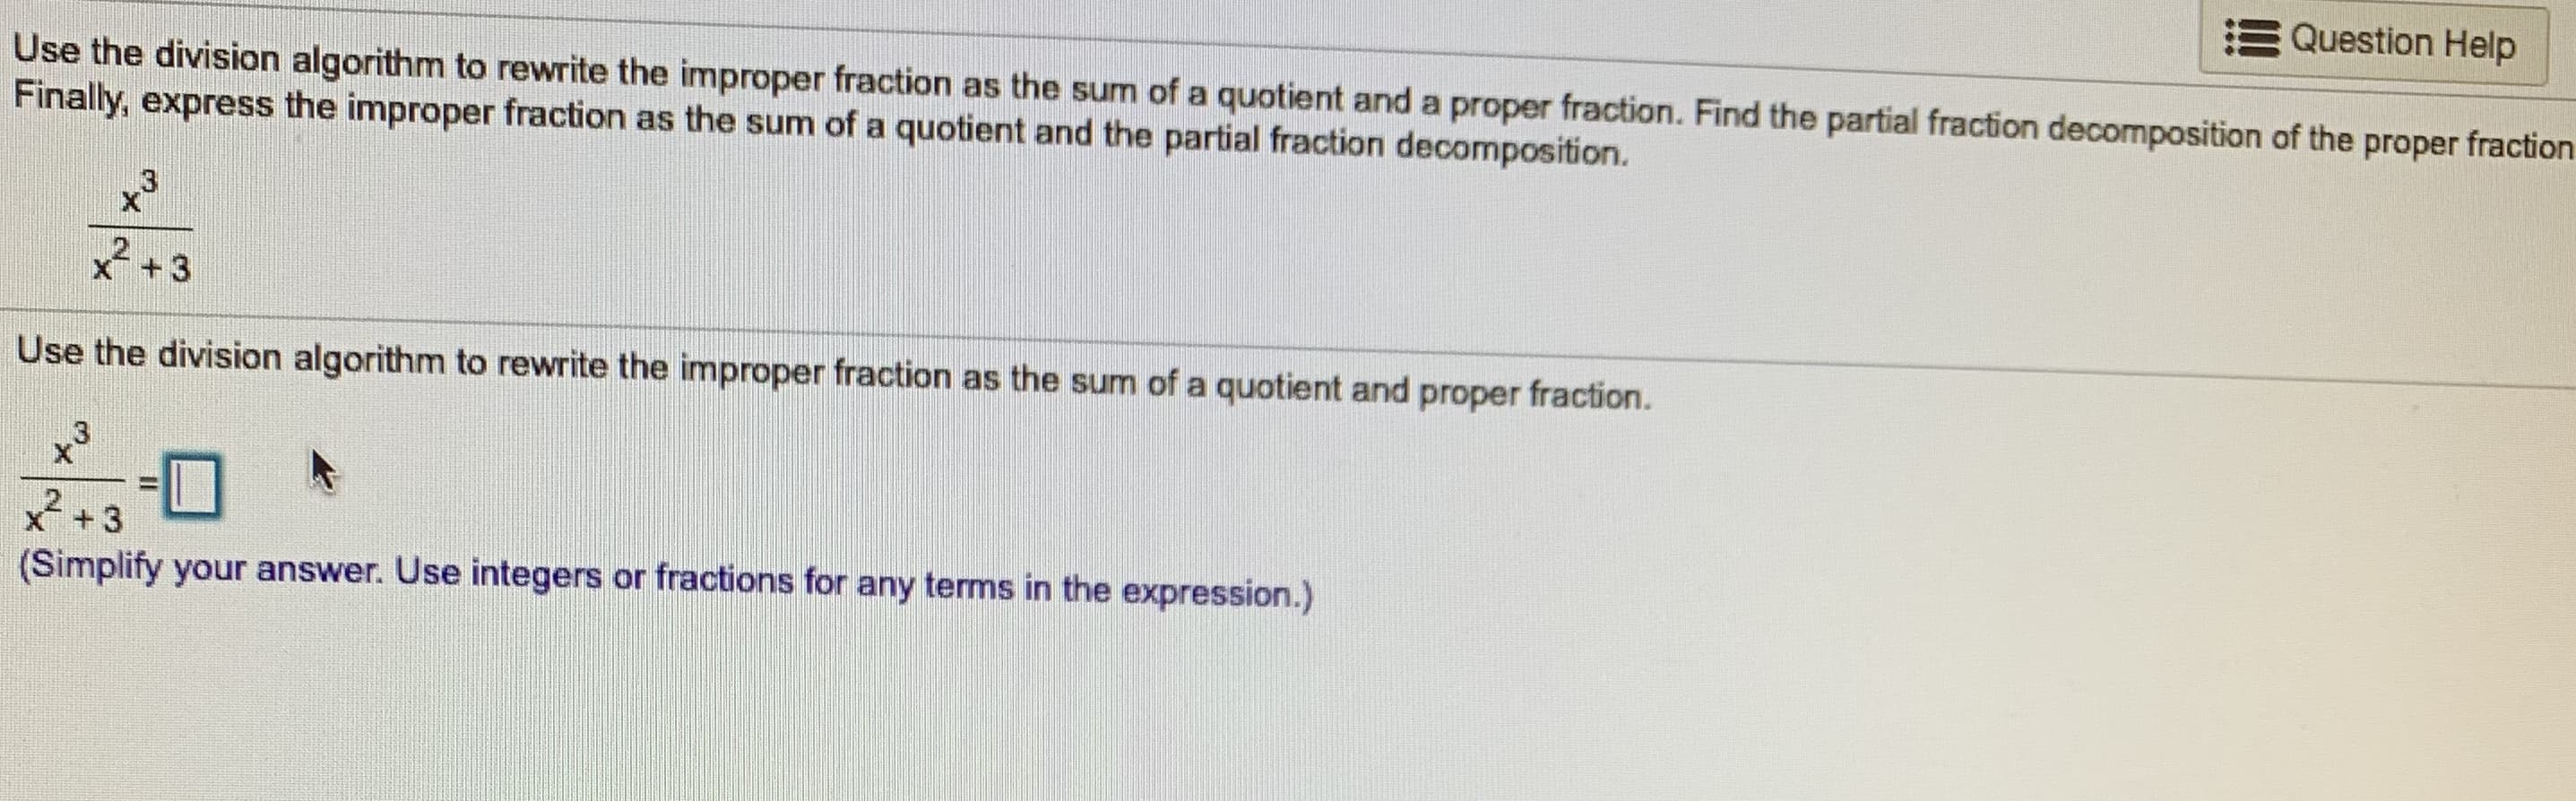 Question Help
Use the division algorithm to rewrite the improper fraction as the sum of a quotient and a proper fraction. Find the partial fraction decomposition of the proper fraction
Finally, express the improper fraction as the sum of a quotient and the partial fraction decomposition.
2+3
Use the division algorithm to rewrite the improper fraction as the sum of a quotient and proper fraction.
C3
XT
3
(Simplify your answer. Use integers or fractions for any terms in the expression.)
